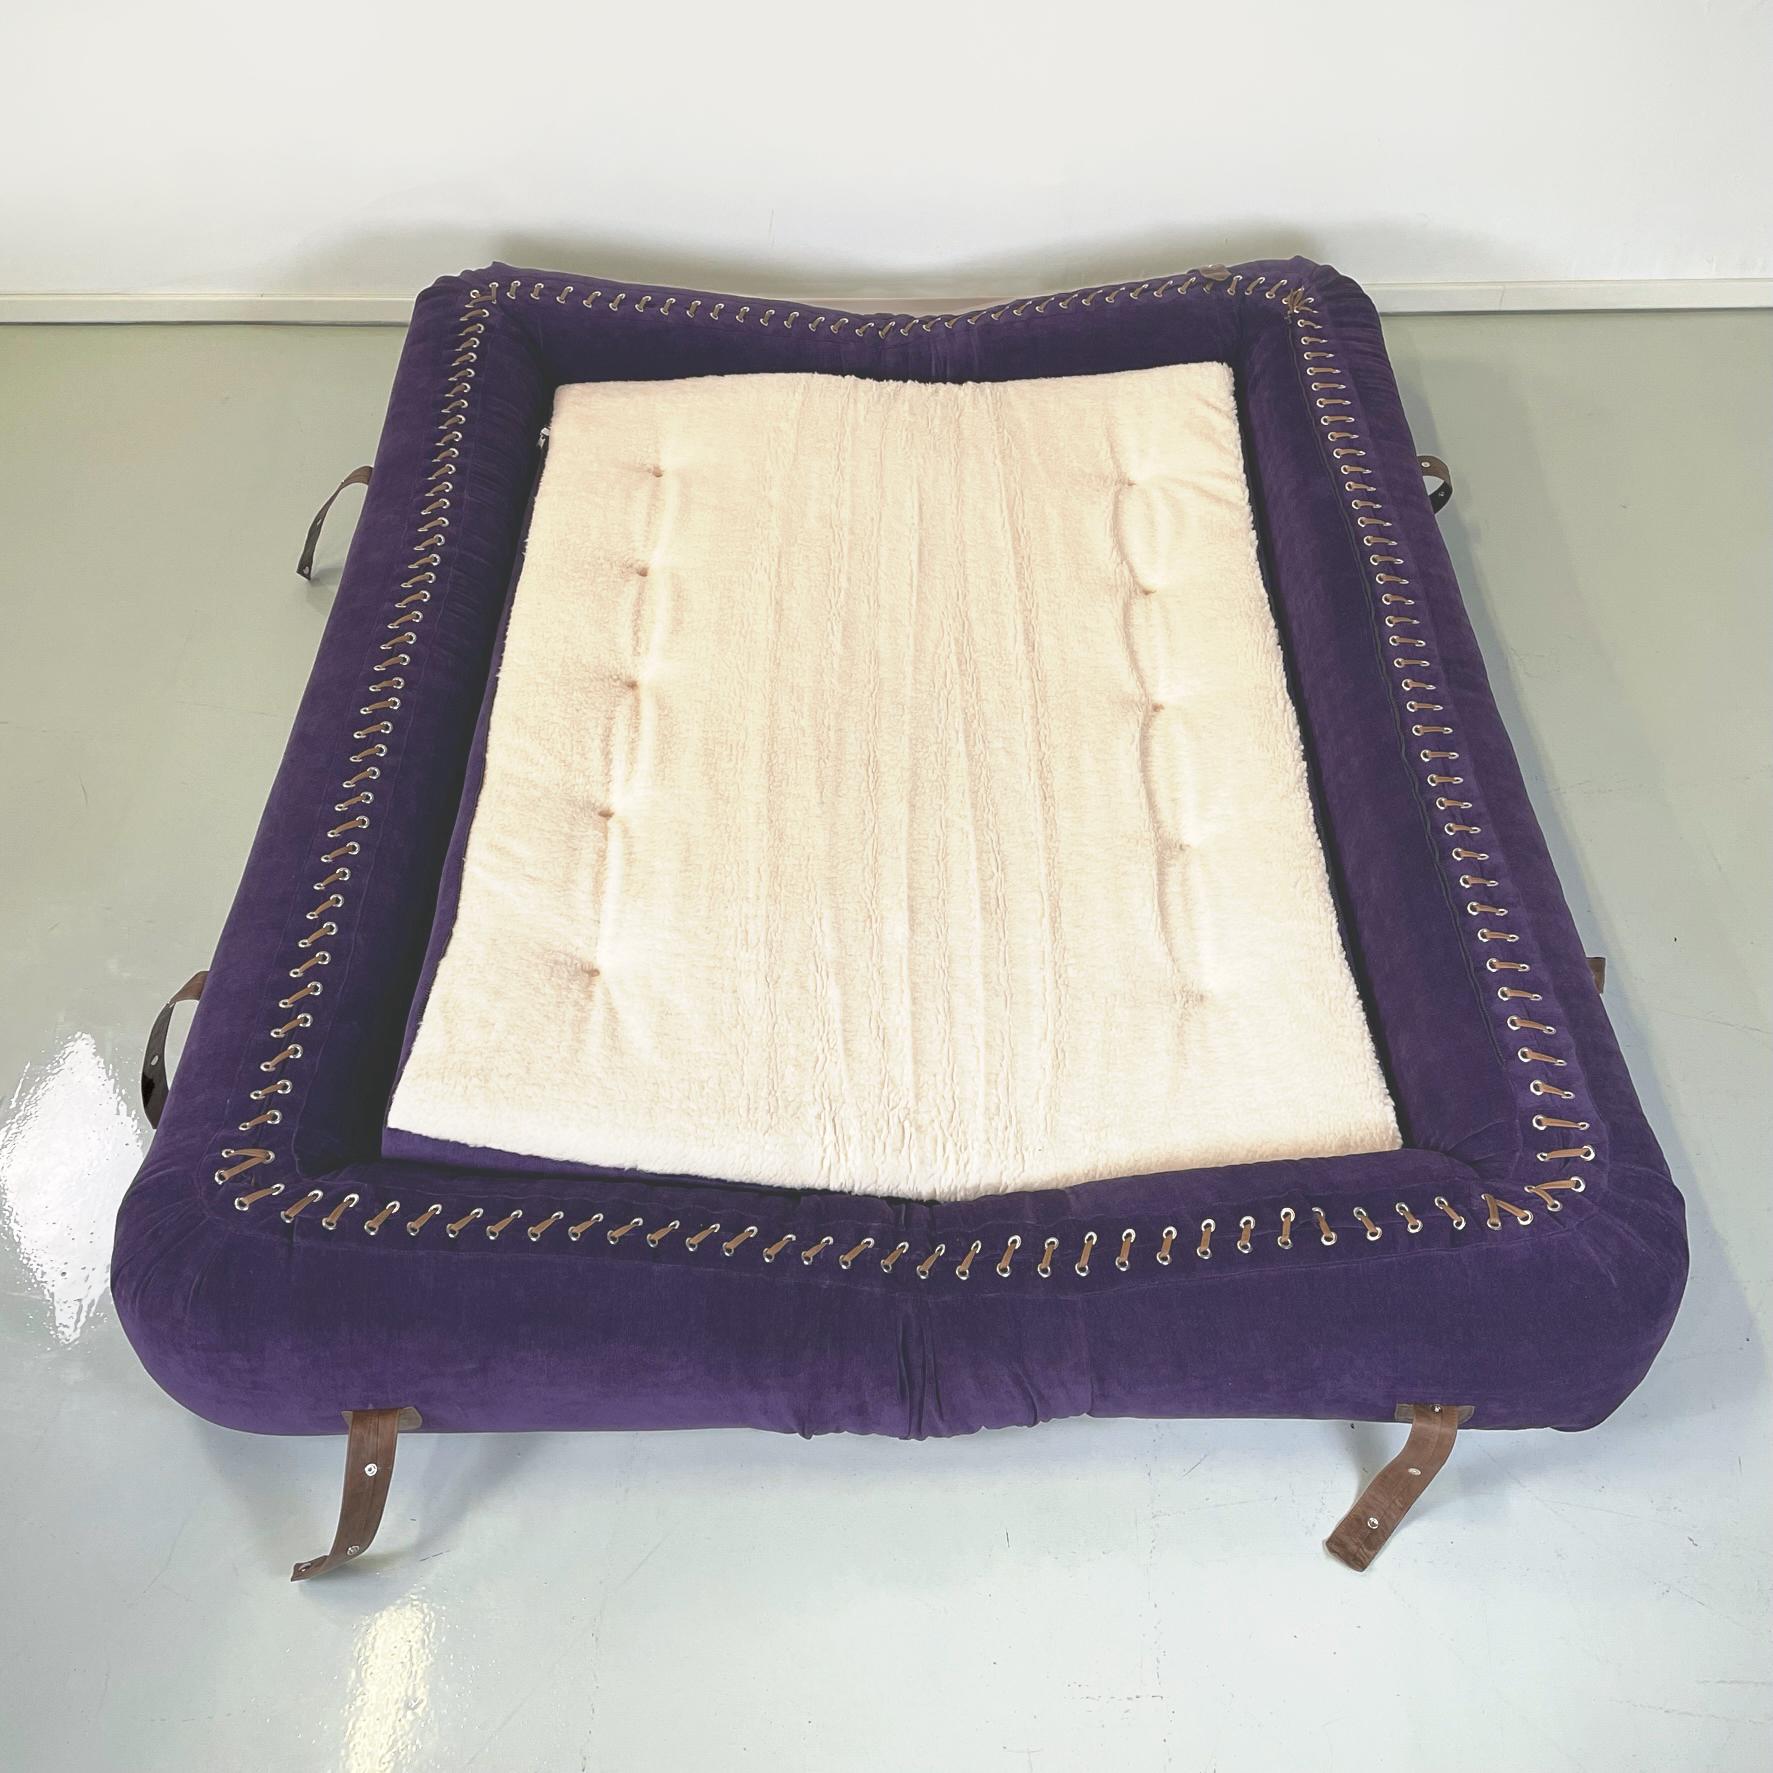 Leather Italian Modern Purple Velvet Sofa Bed Anfibio by Becchi for Giovannetti, 1970s